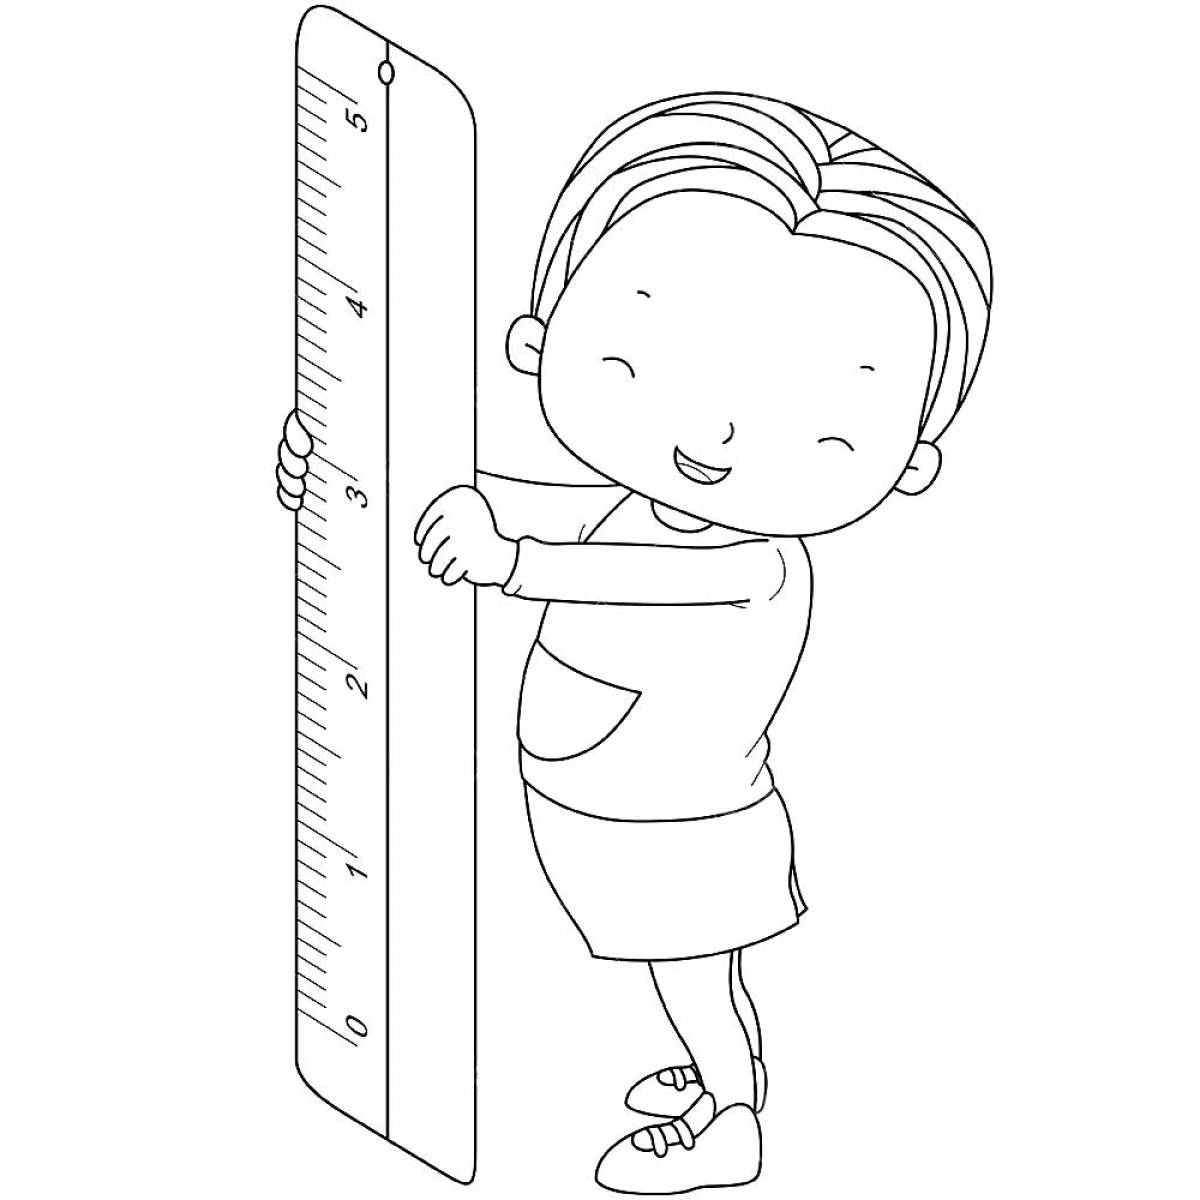 Kid with ruler